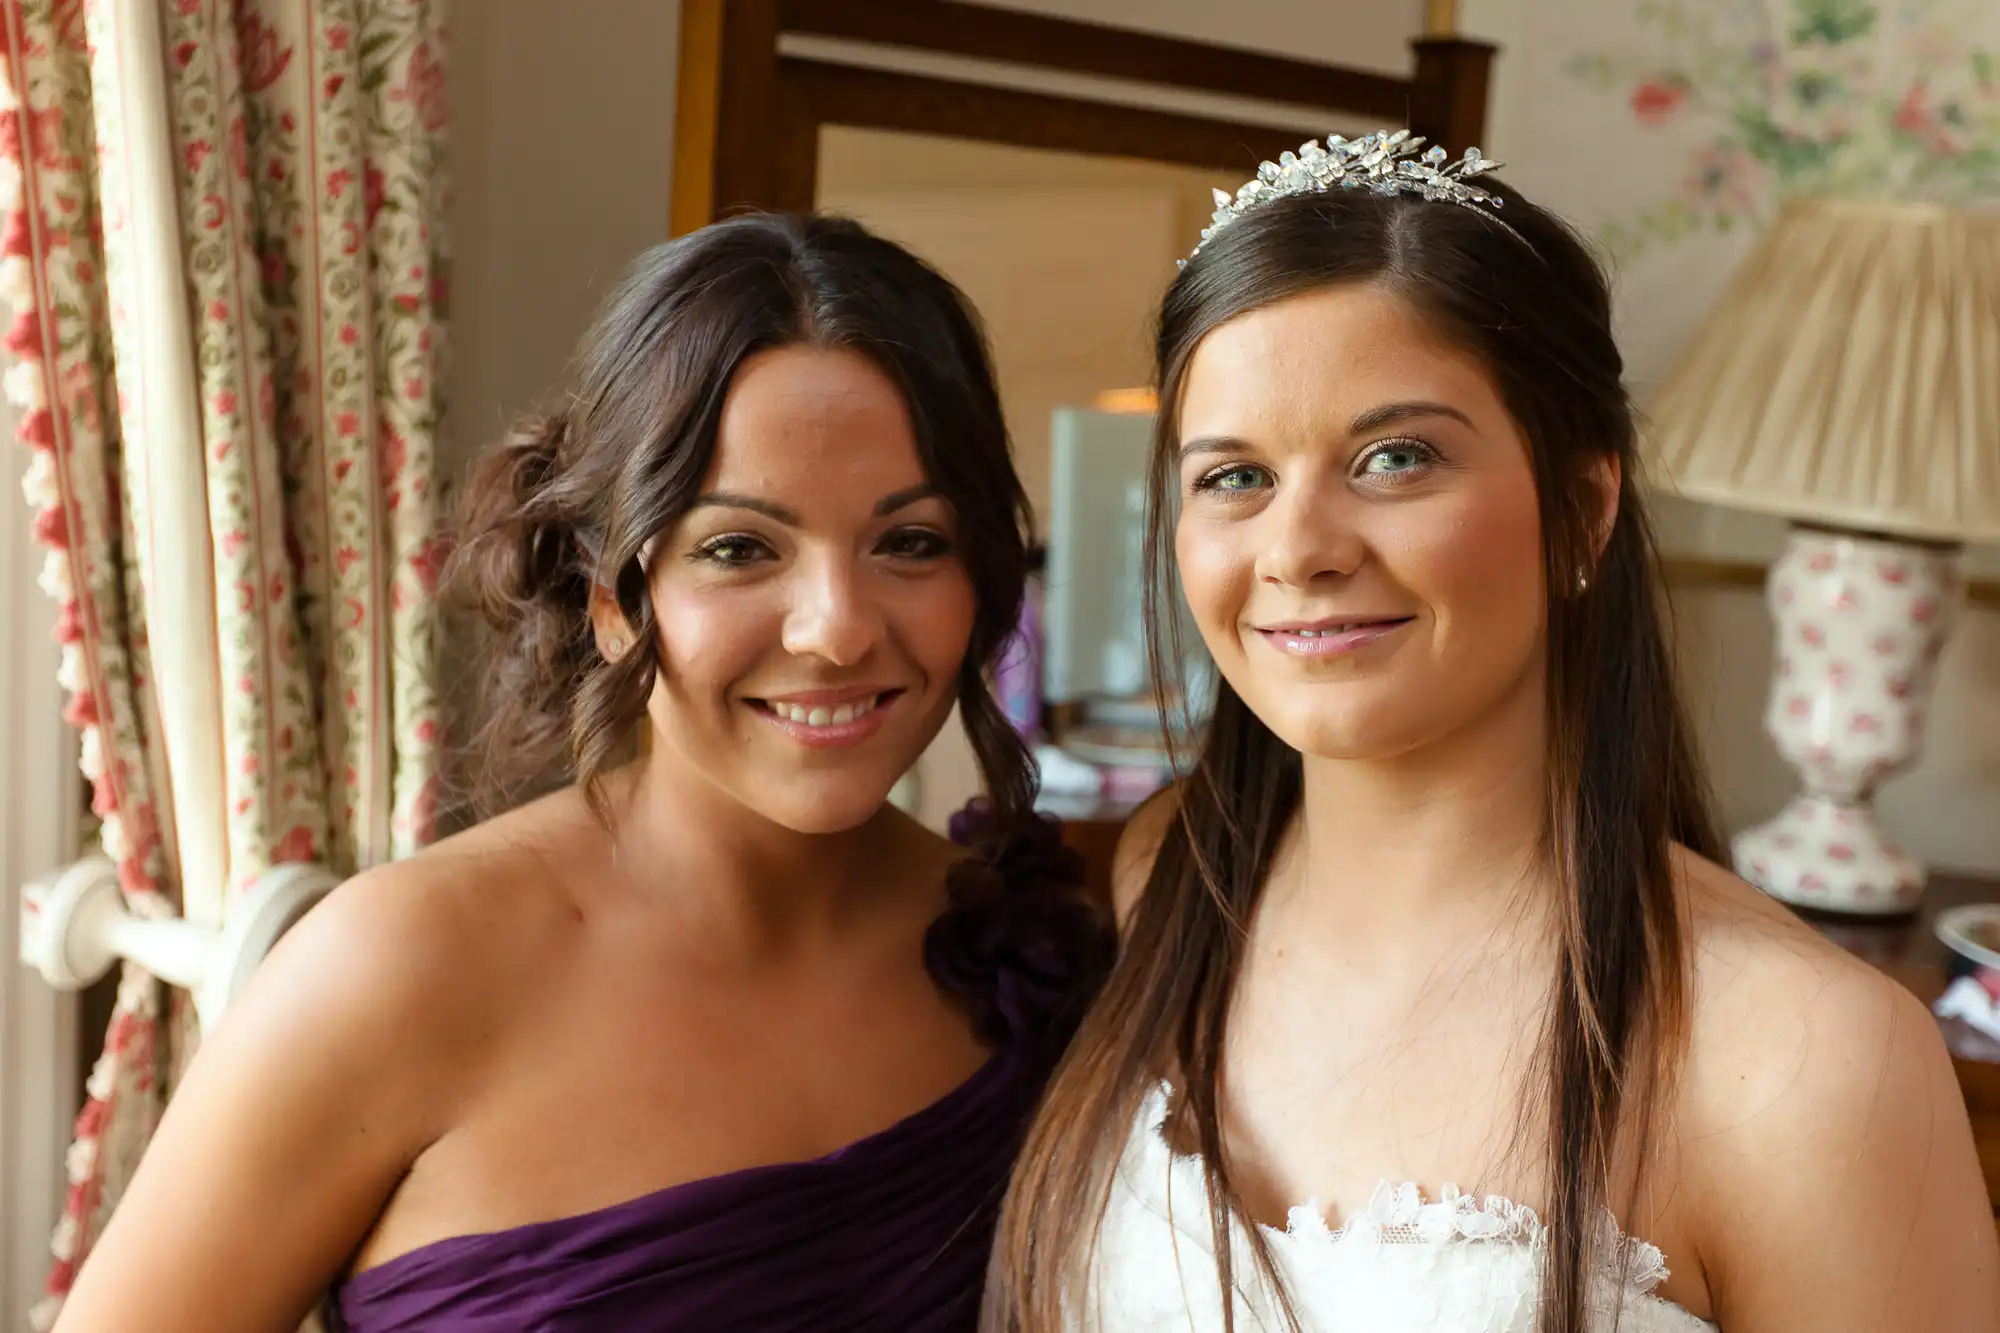 Two women smiling indoors, one in a white bridal gown with a tiara and the other in a purple dress.